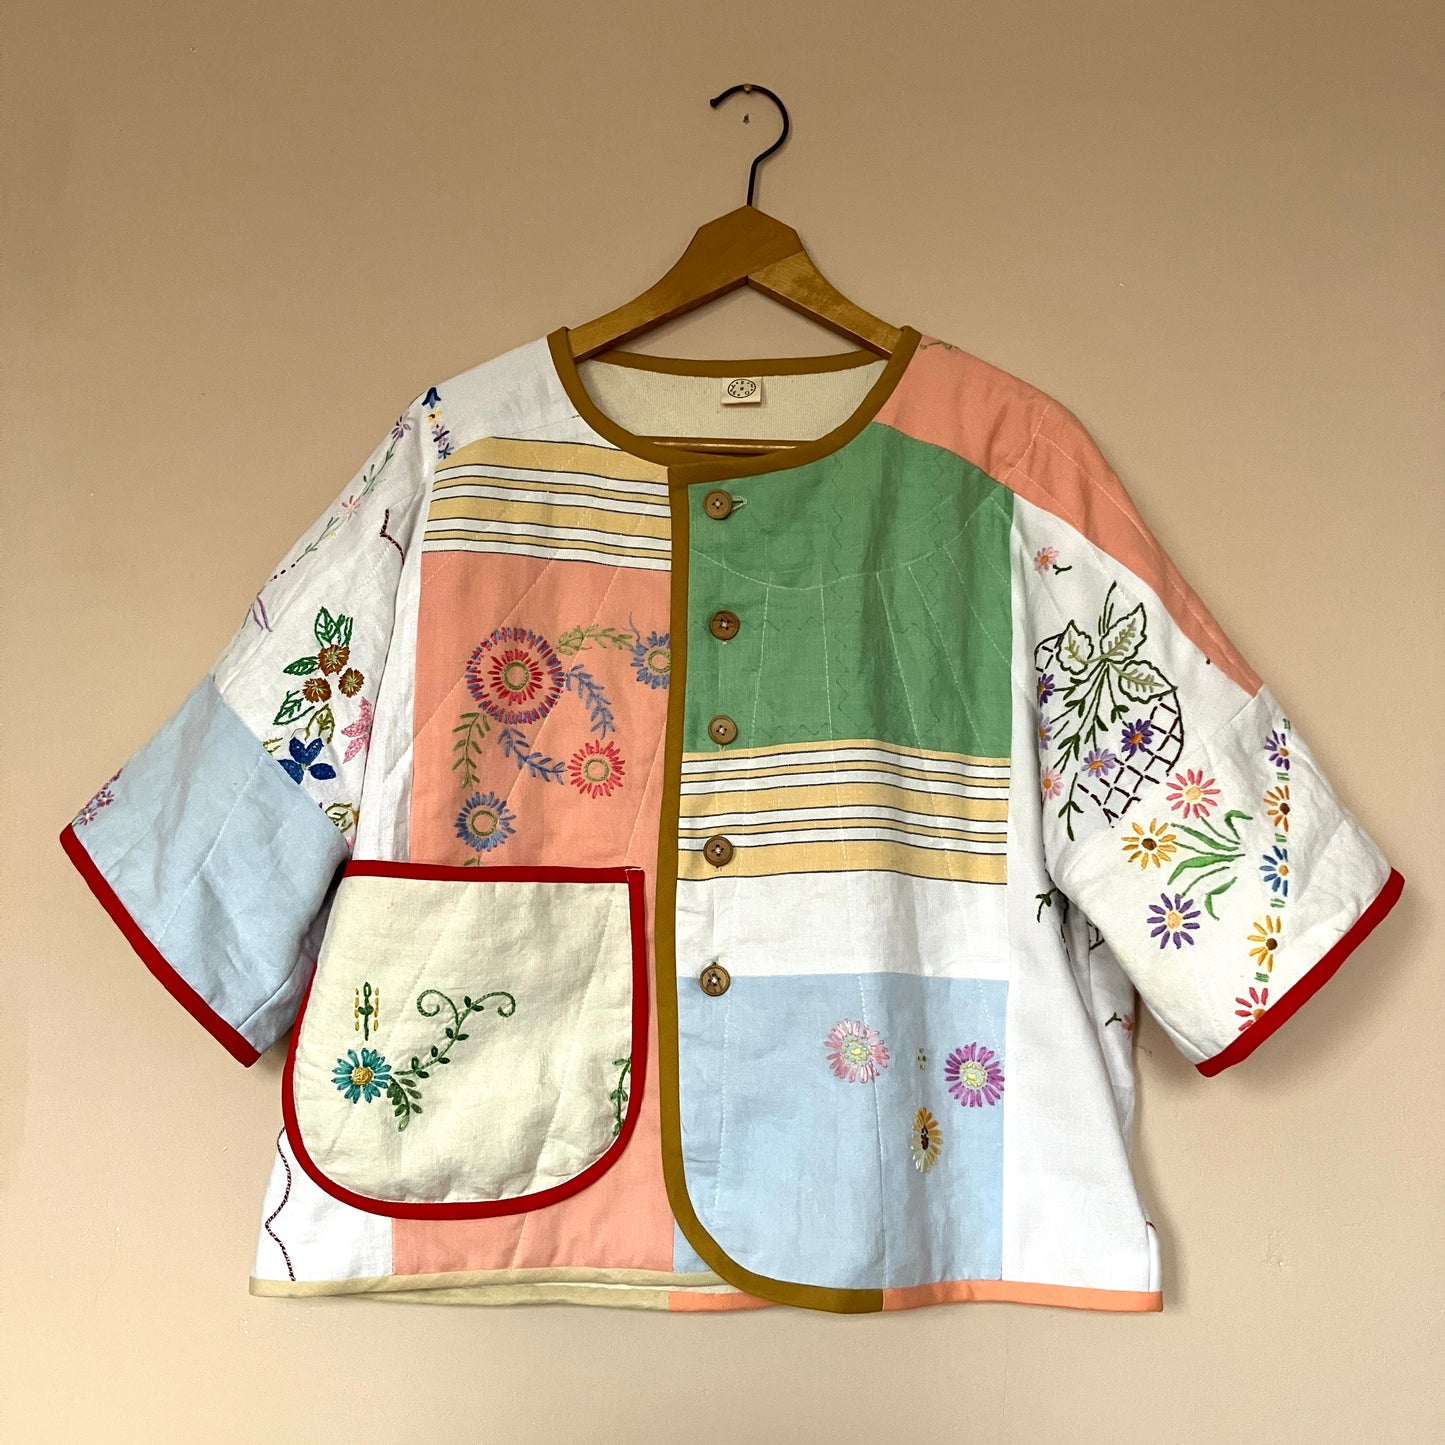 quilted top or jacket made from a patchwork of vintage tablecloths